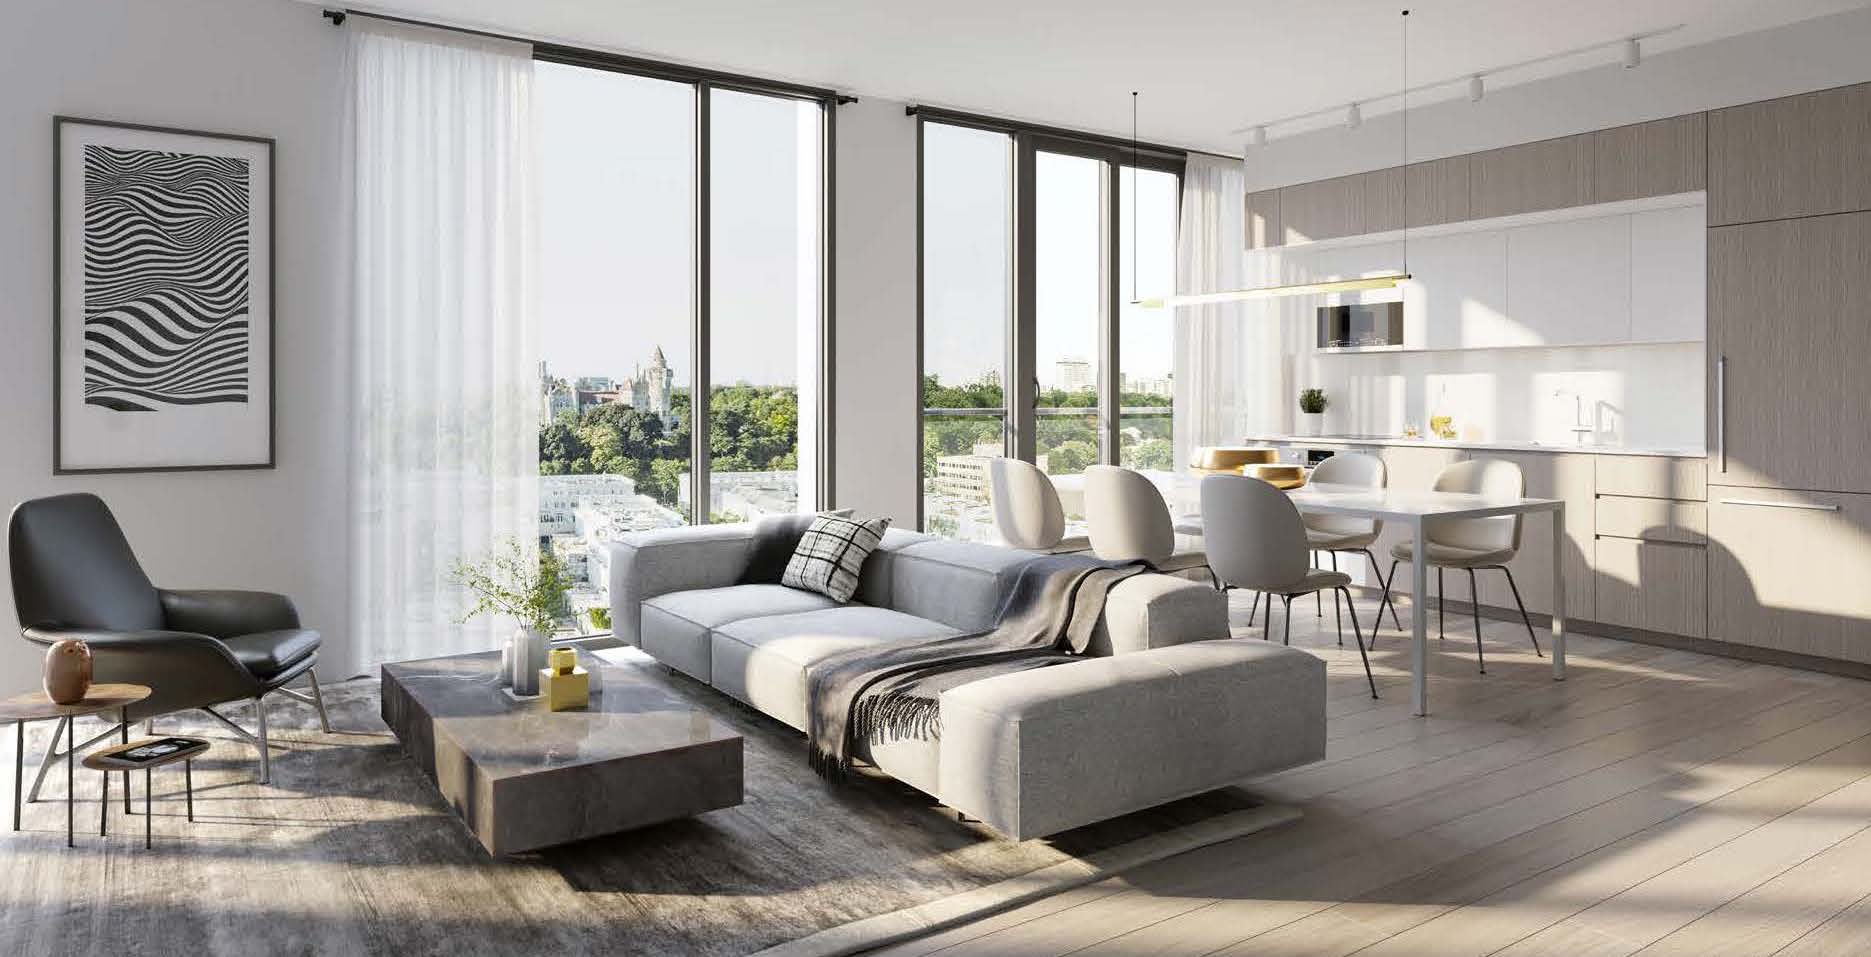 Rendering of Anx on Dupont Condos suite interior open concept living room.